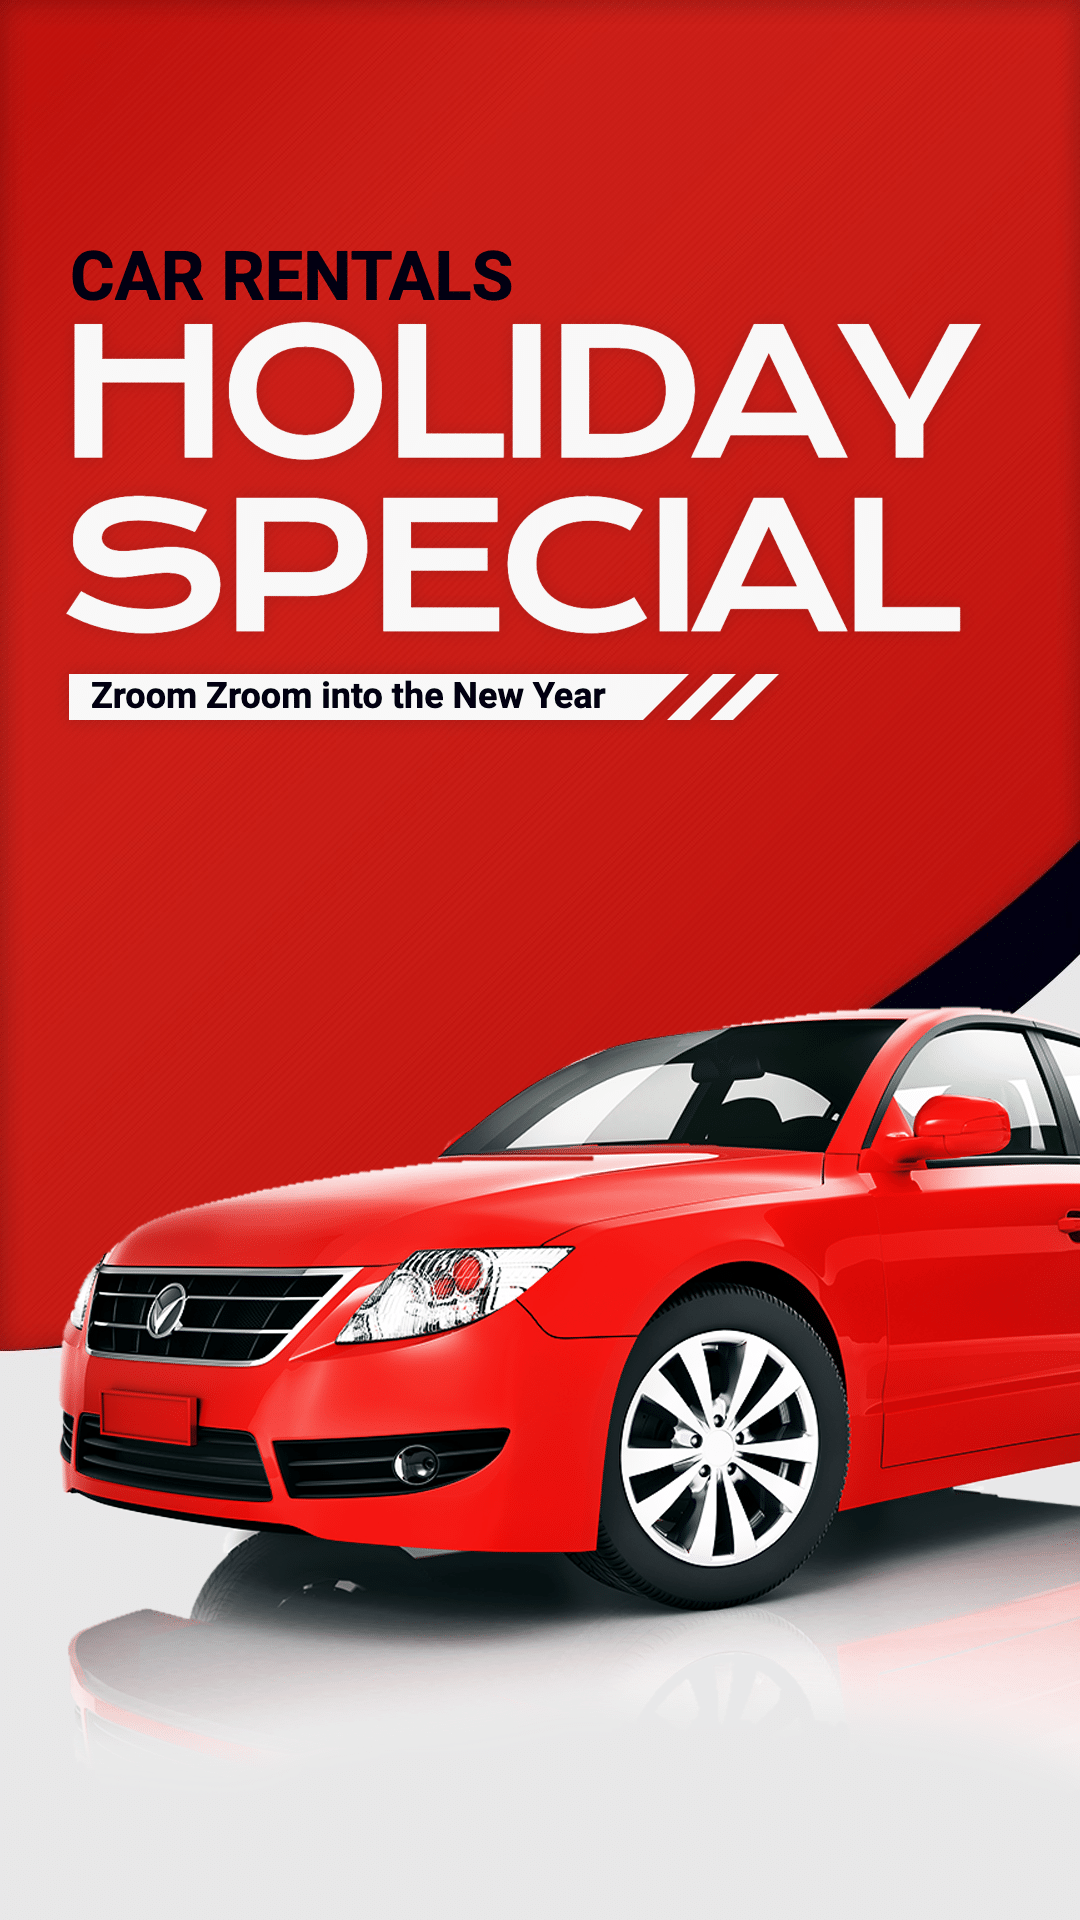 Car Rentals Holiday Special Promotion Ecommerce Story预览效果